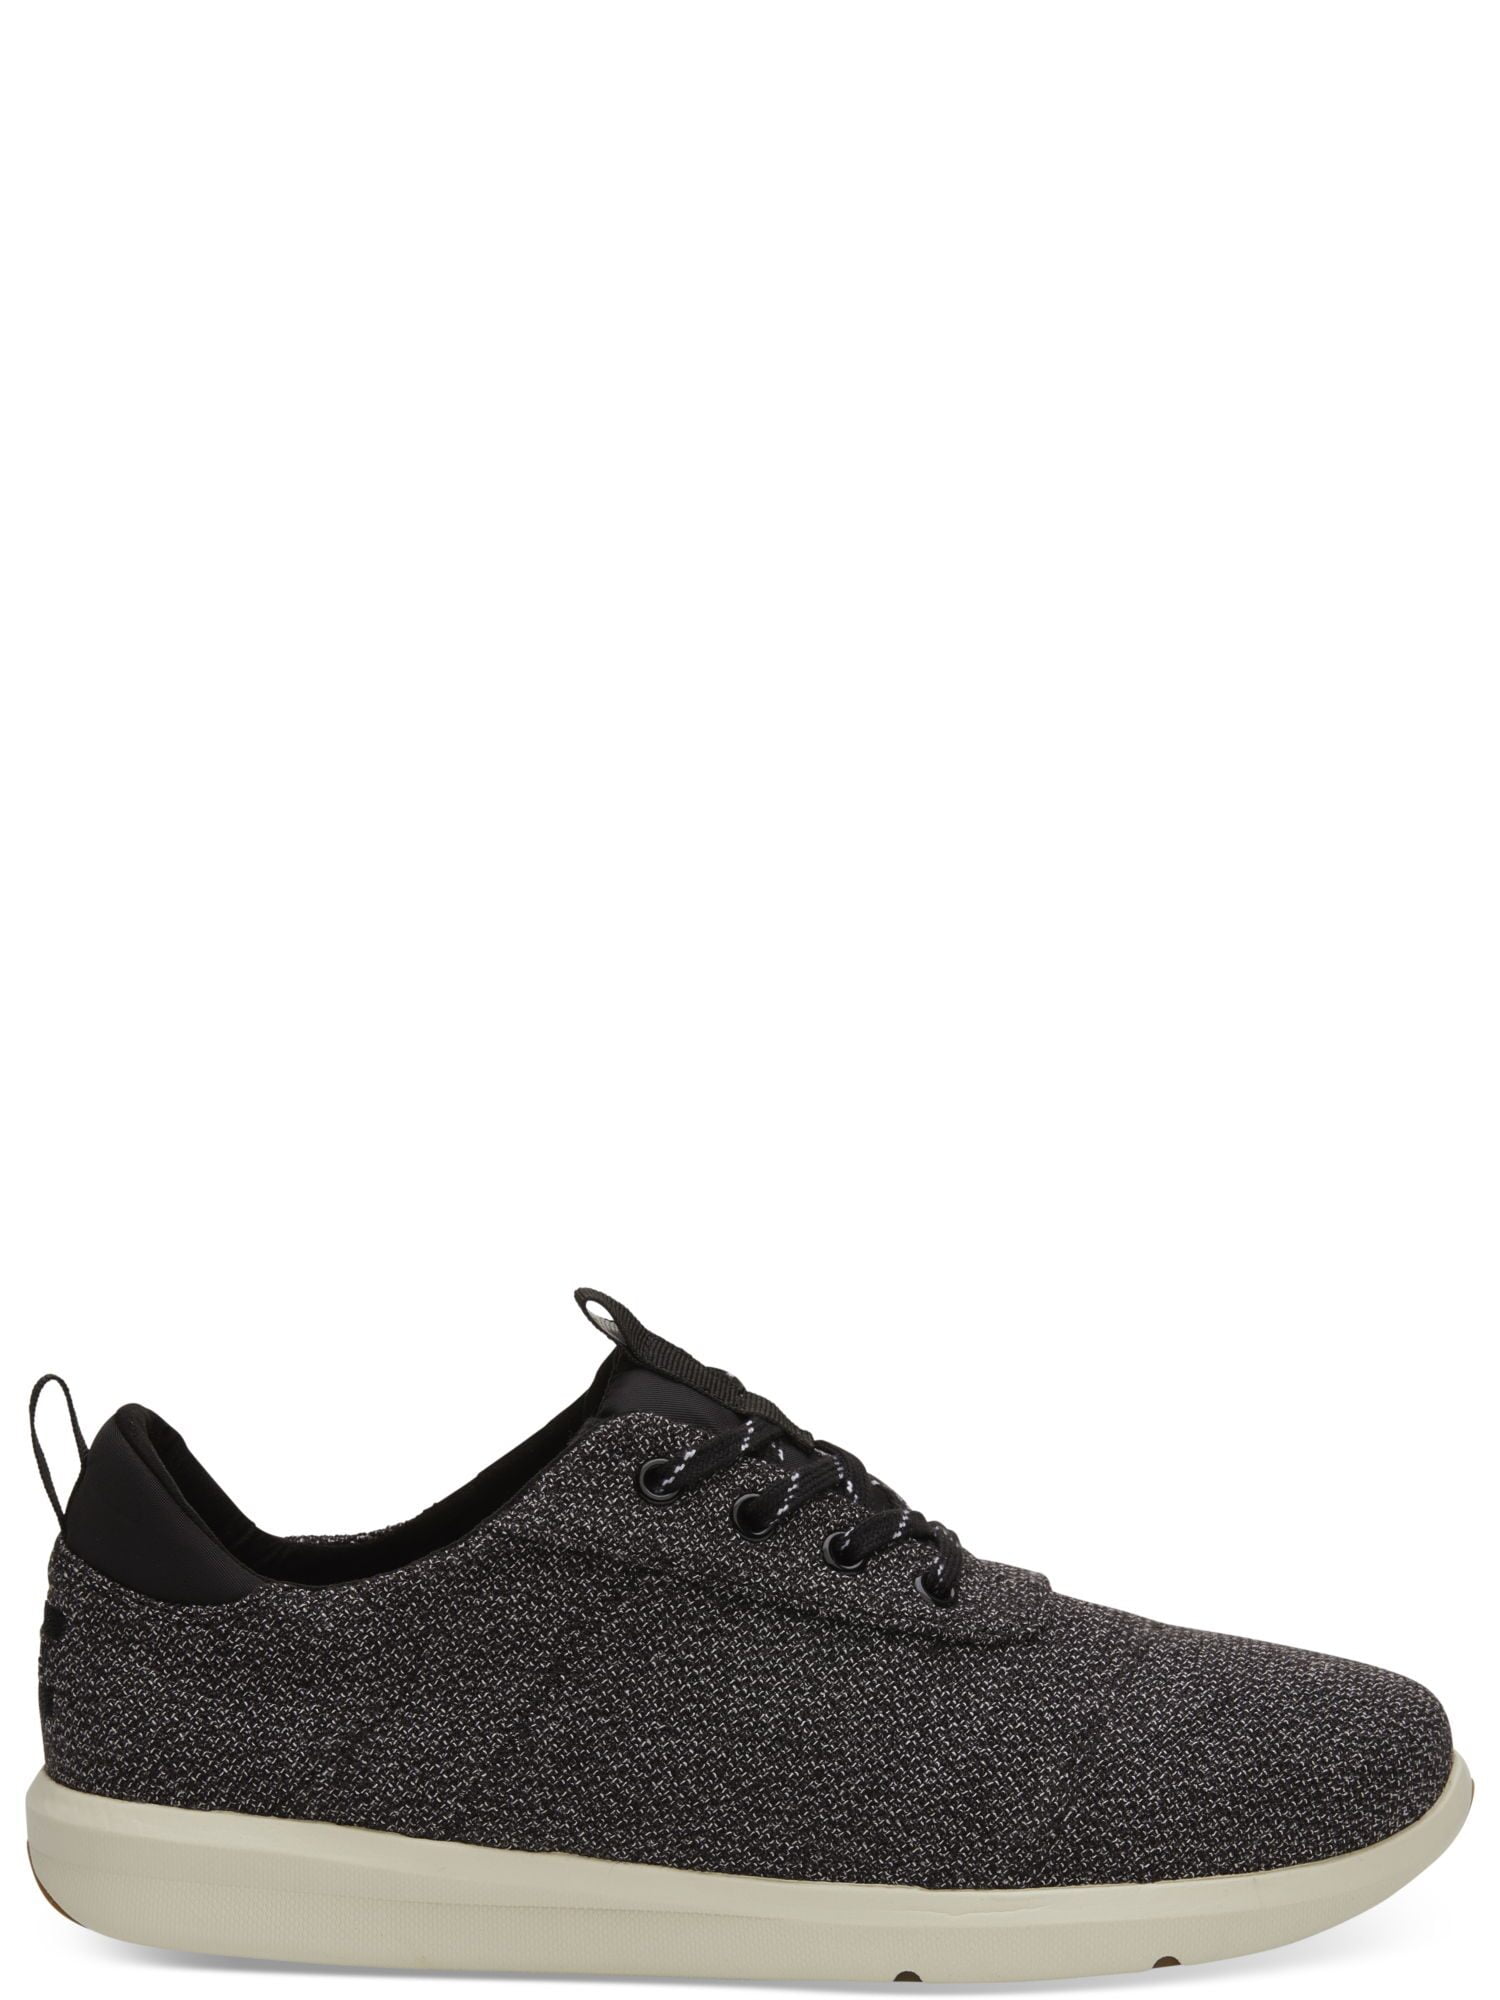 TOMS - TOMS Men&amp;#39;s Terry Cloth Cabrillo Sneakers